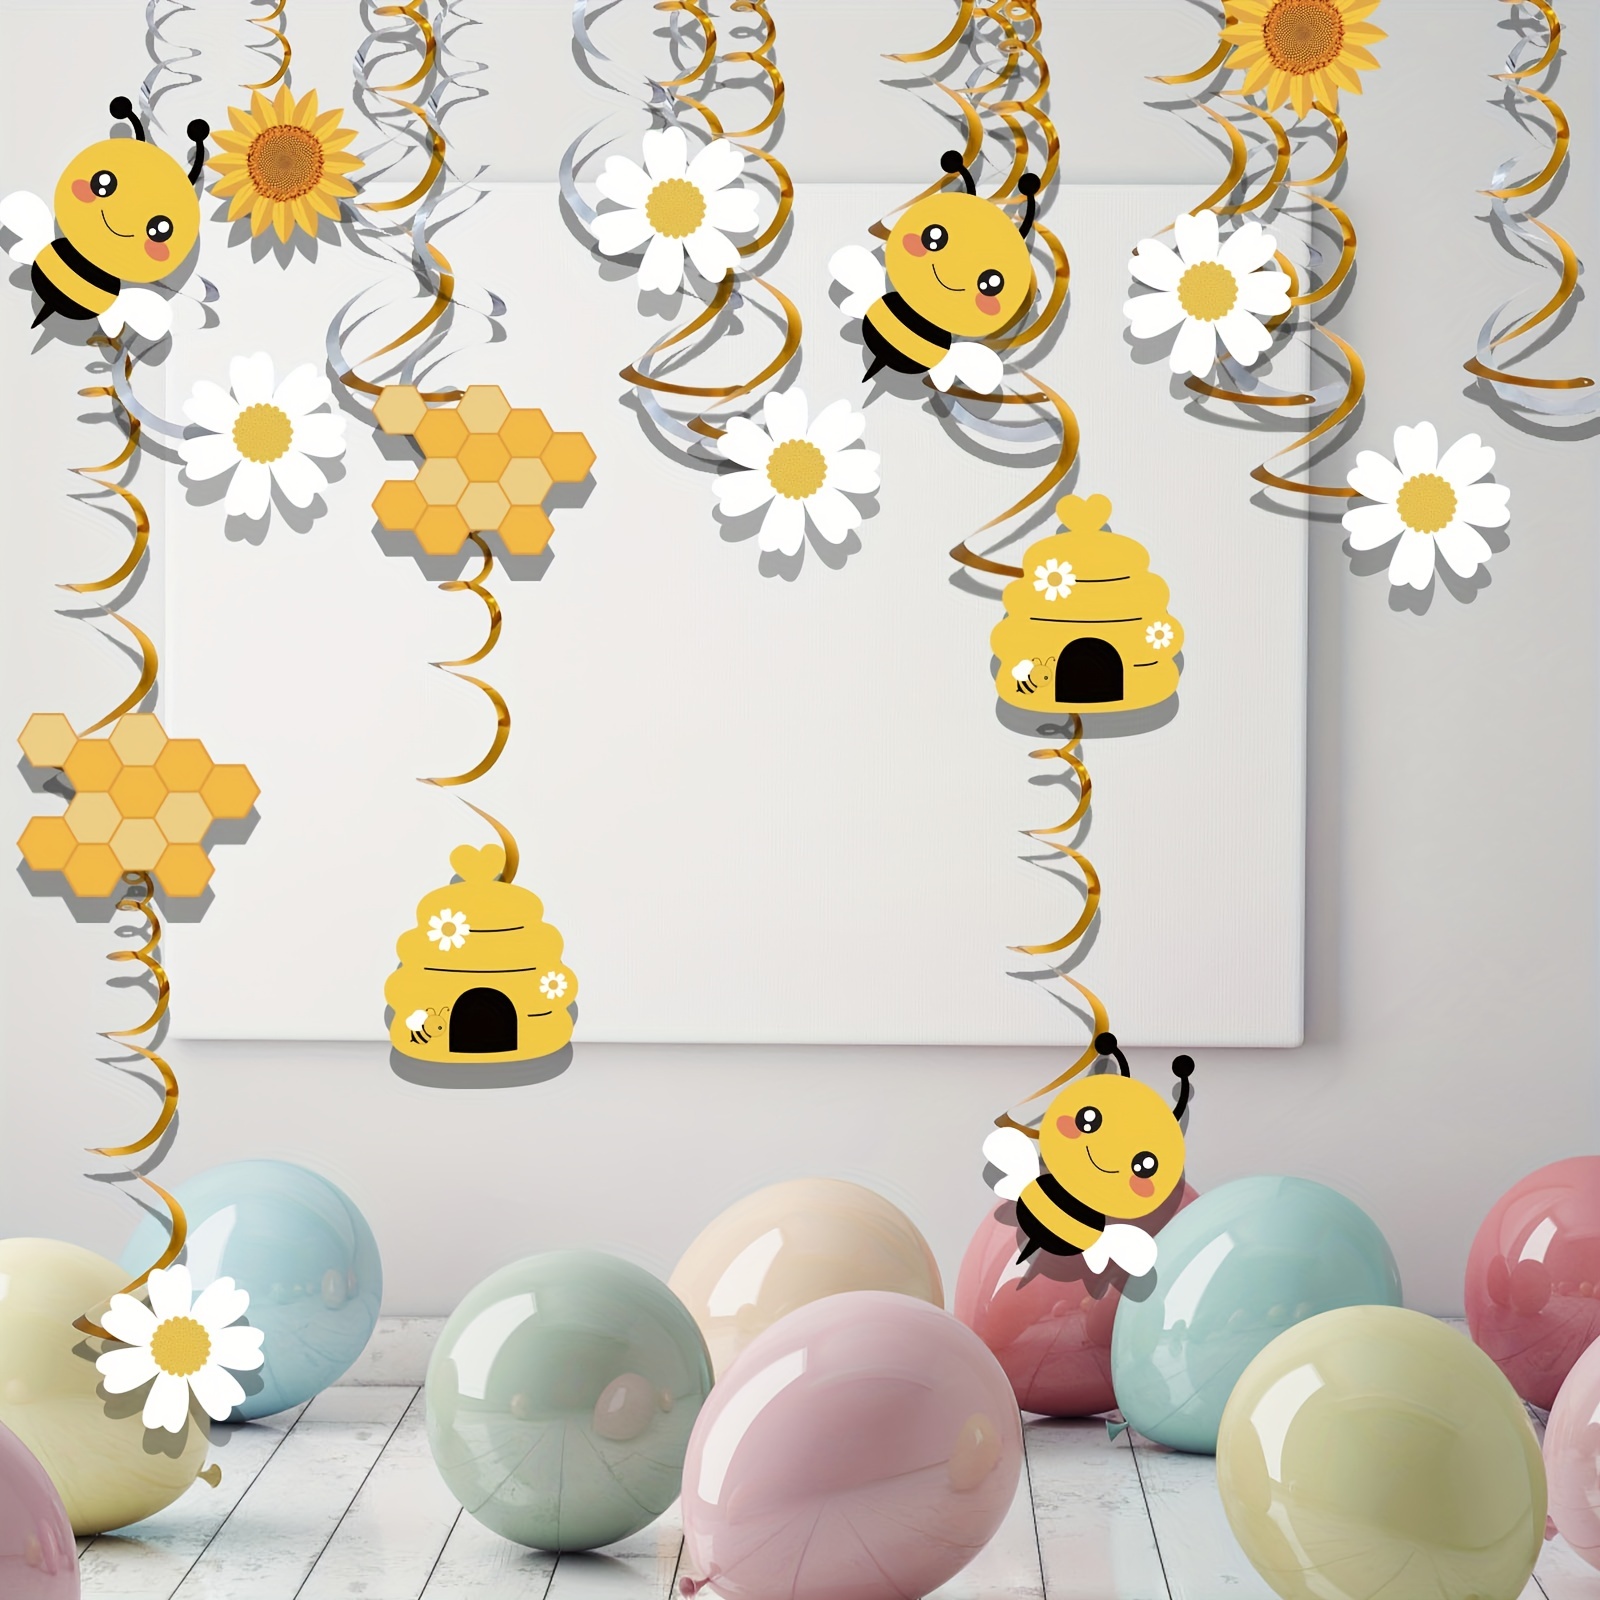 20PCS Bumble Bee Hanging Swirl Decorations, Bee Party Hanging Swirls Foil  Ceiling Streamers Honey Bee Themed Party Supplies for Kids Birthday Baby